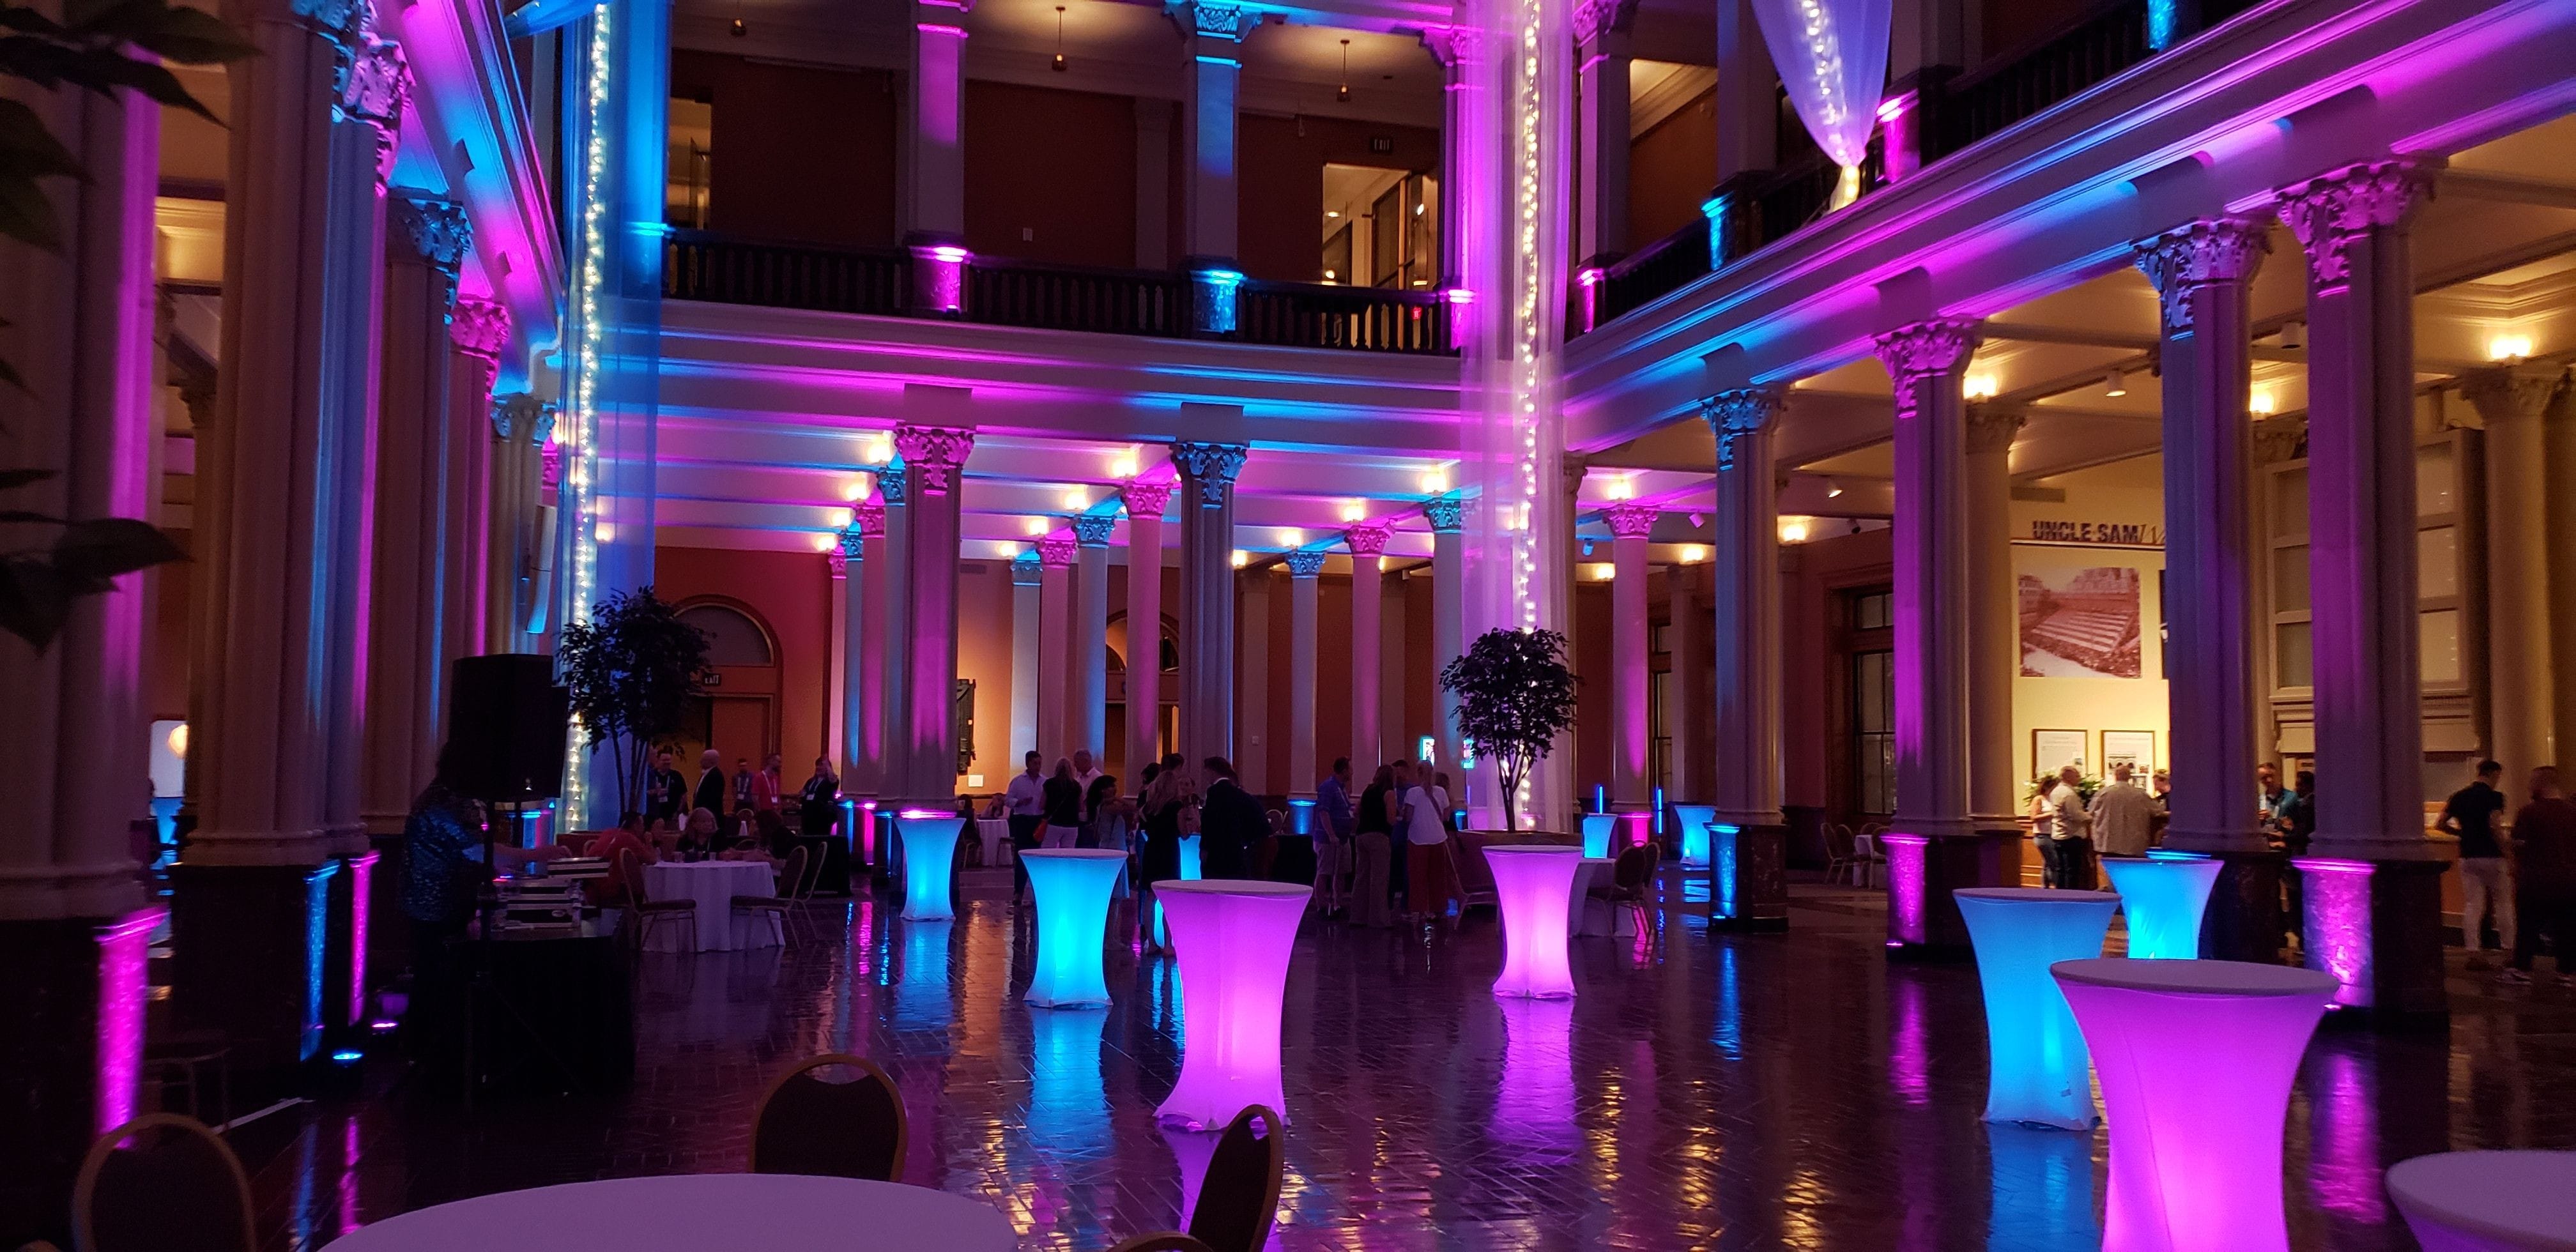 Event lighting at the Landmark Center in St. Paul with glowing cocktail tables.